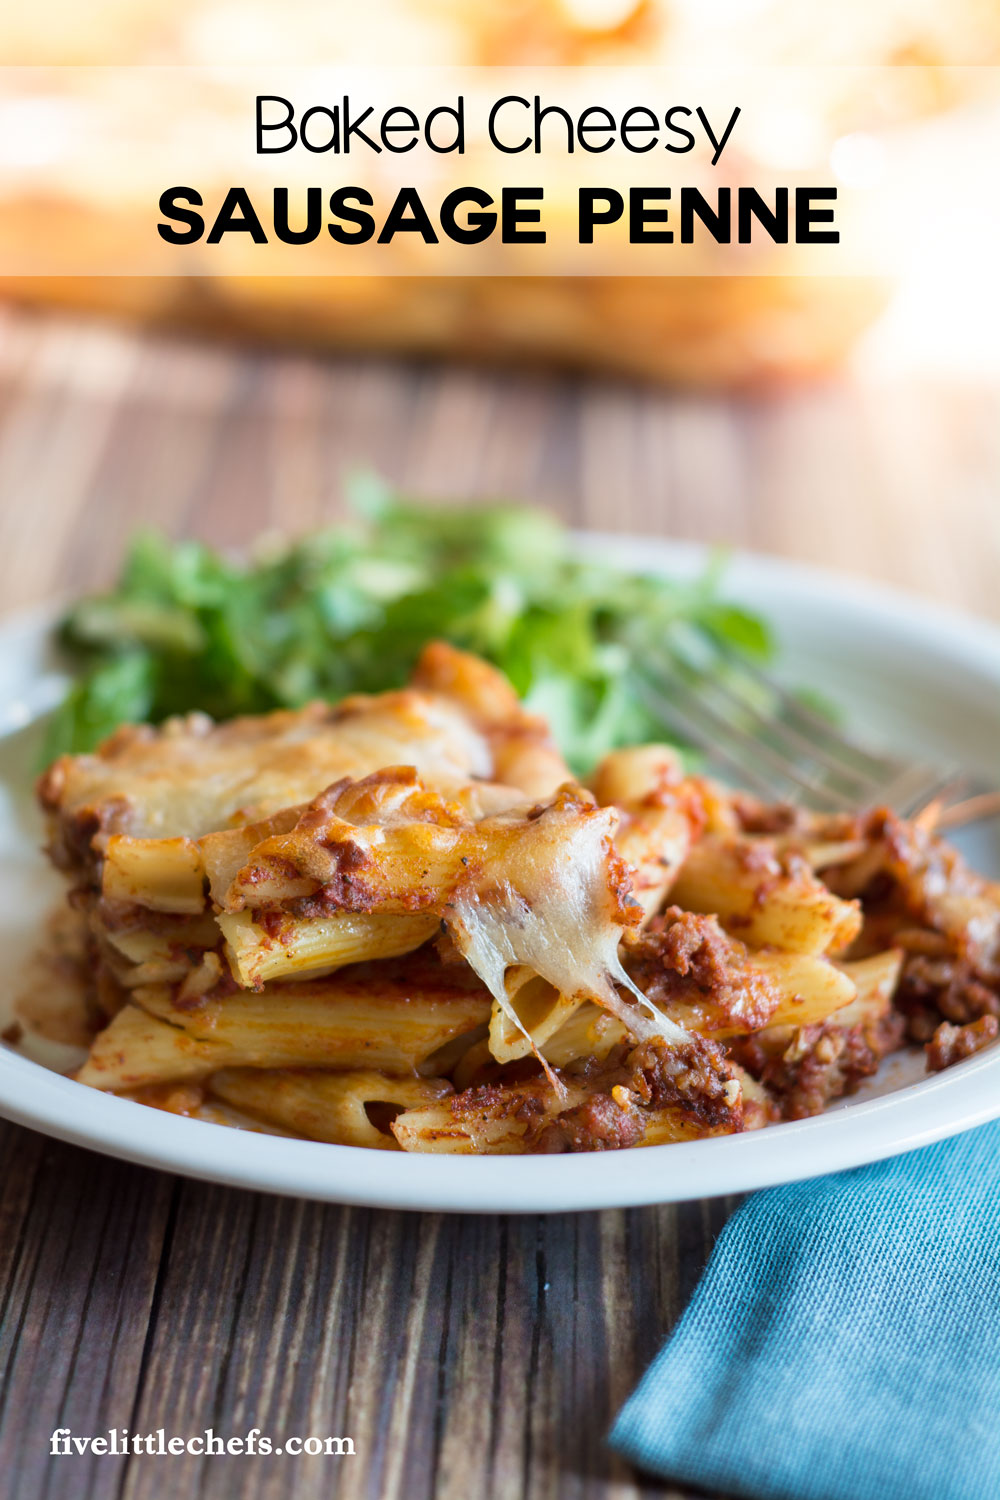 Baked Cheesy Sausage Penne is ultimate comfort foods. Use penne pasta, italian sausage and lots of mozzerella cheese to make it as cheesy as you want. Dinner is easy on the table within an hour, making for a great weeknight meal.